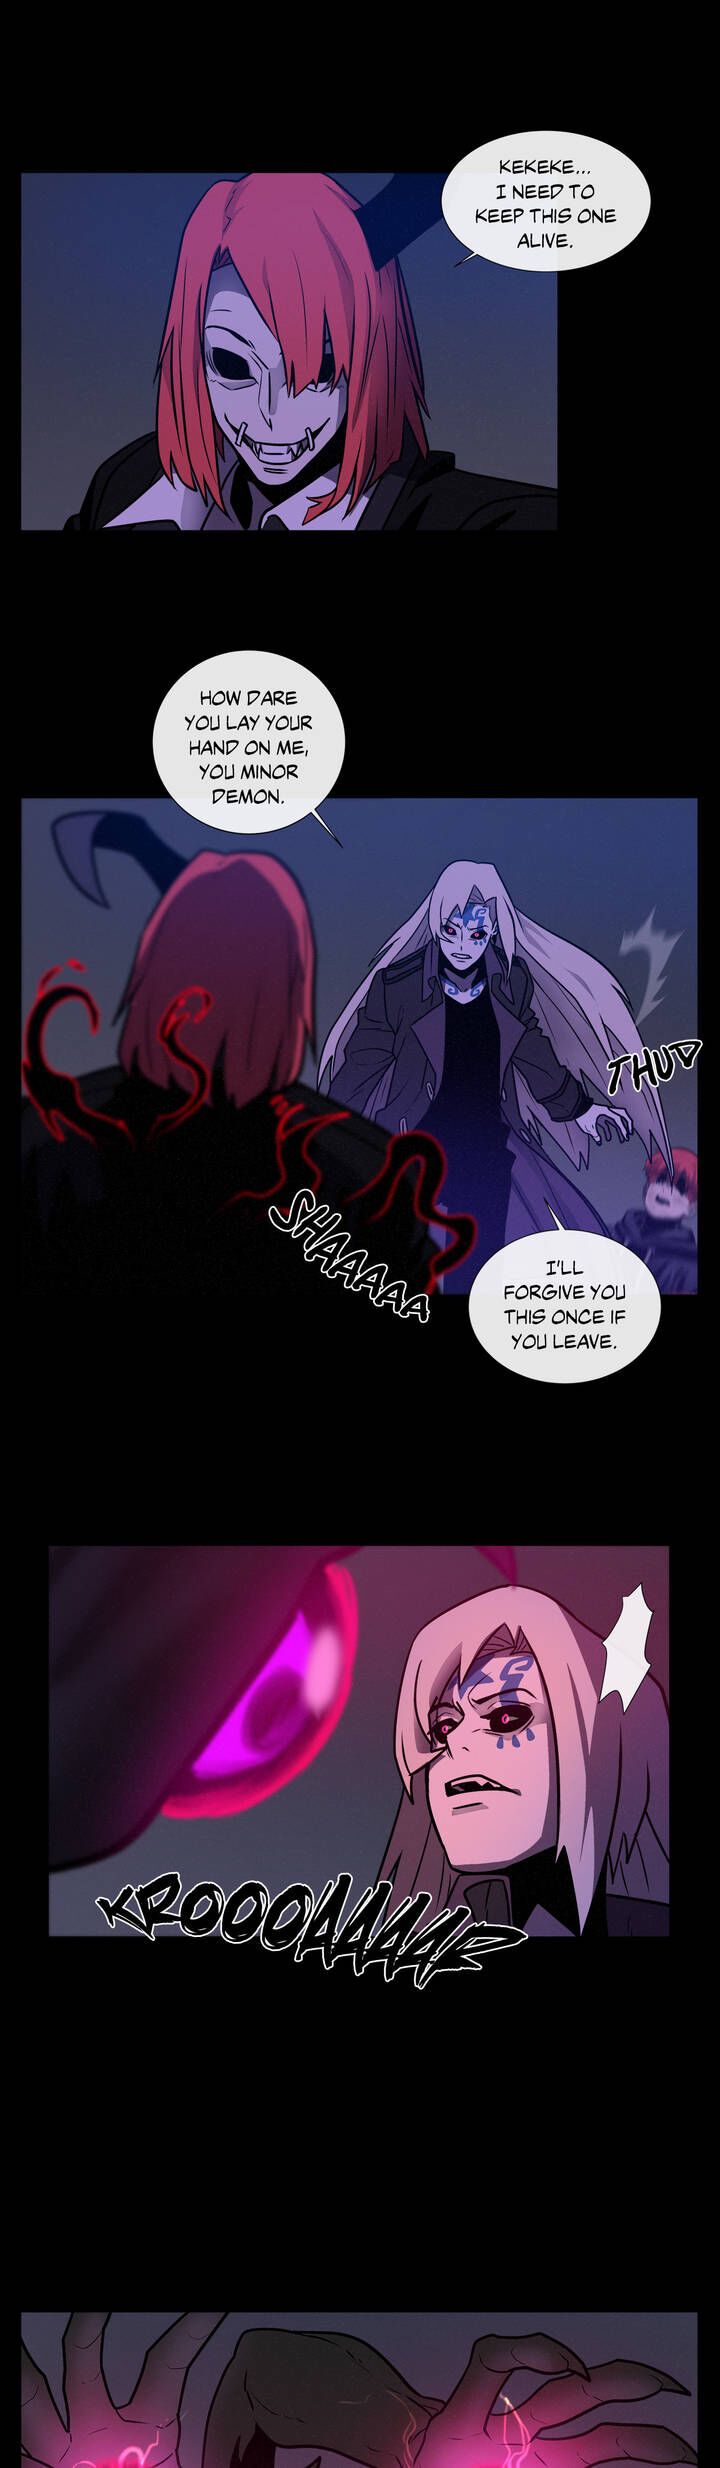 The Devil's Boy Chapter 034 page 2